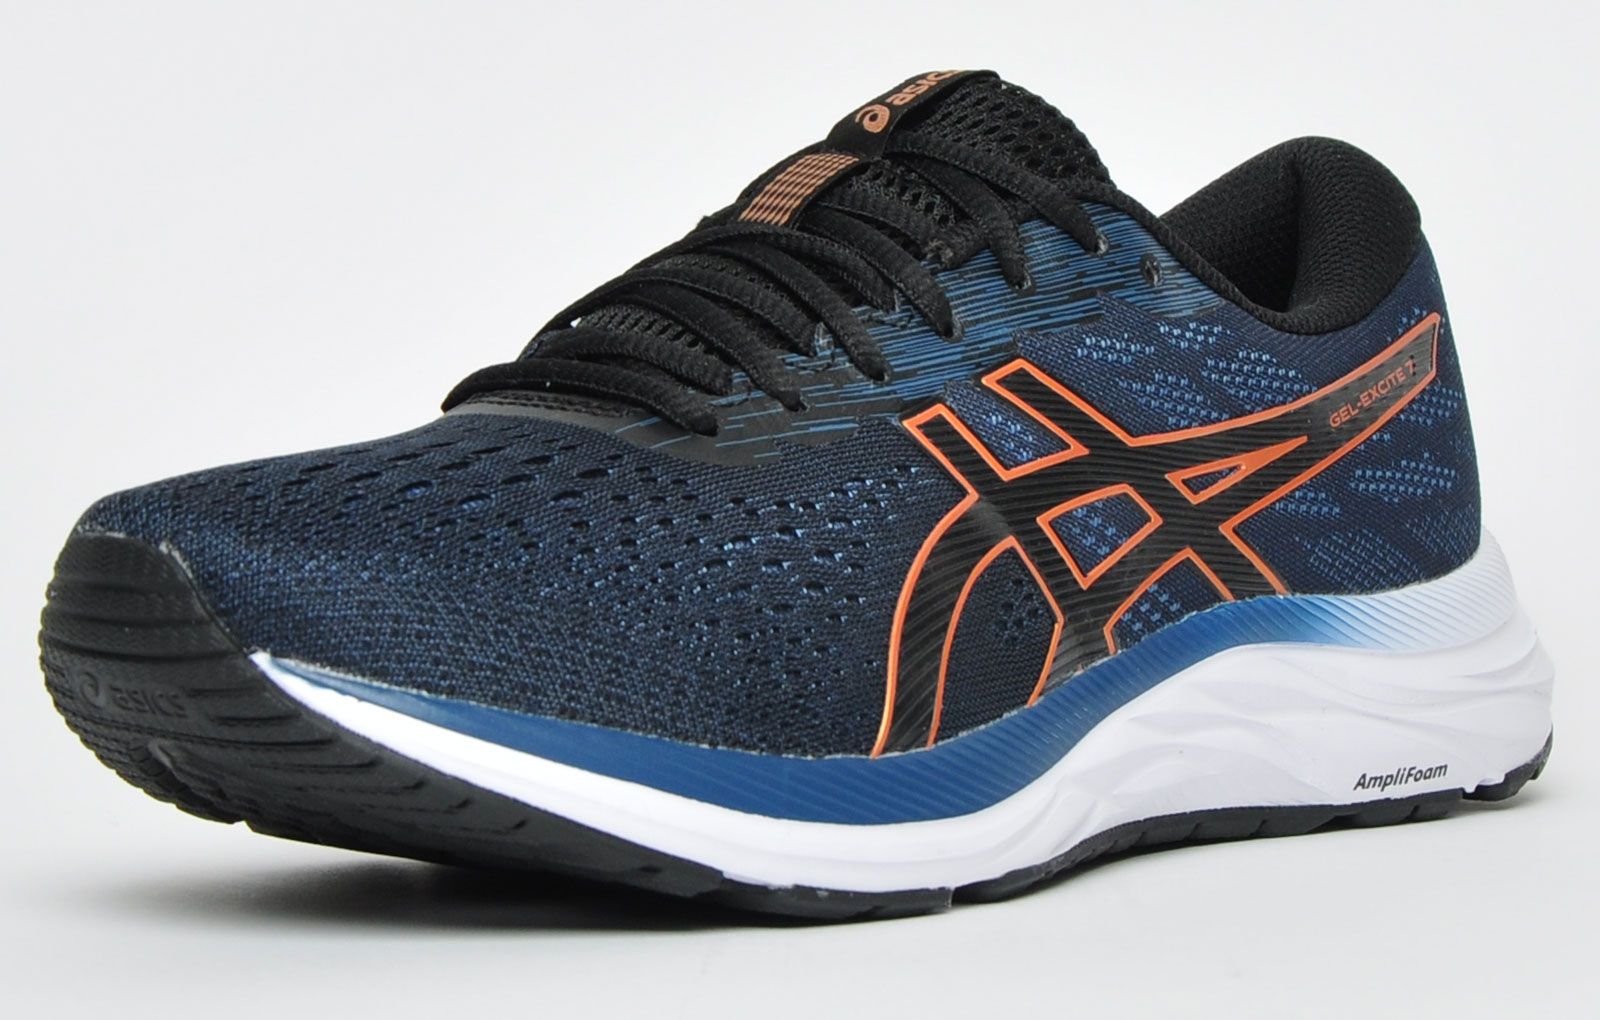 These Asics Gel- Excite 7 men’s running shoes are crafted from a breathable lightweight technical textile mesh to provide optimised breathability and keep feet cool and dry throughout wear. Featuring synthetic overlays to keep you supported, and ensuring a more comfortable, secure running experience, this shoe is a great road runner as well as a gym worker. <p class=